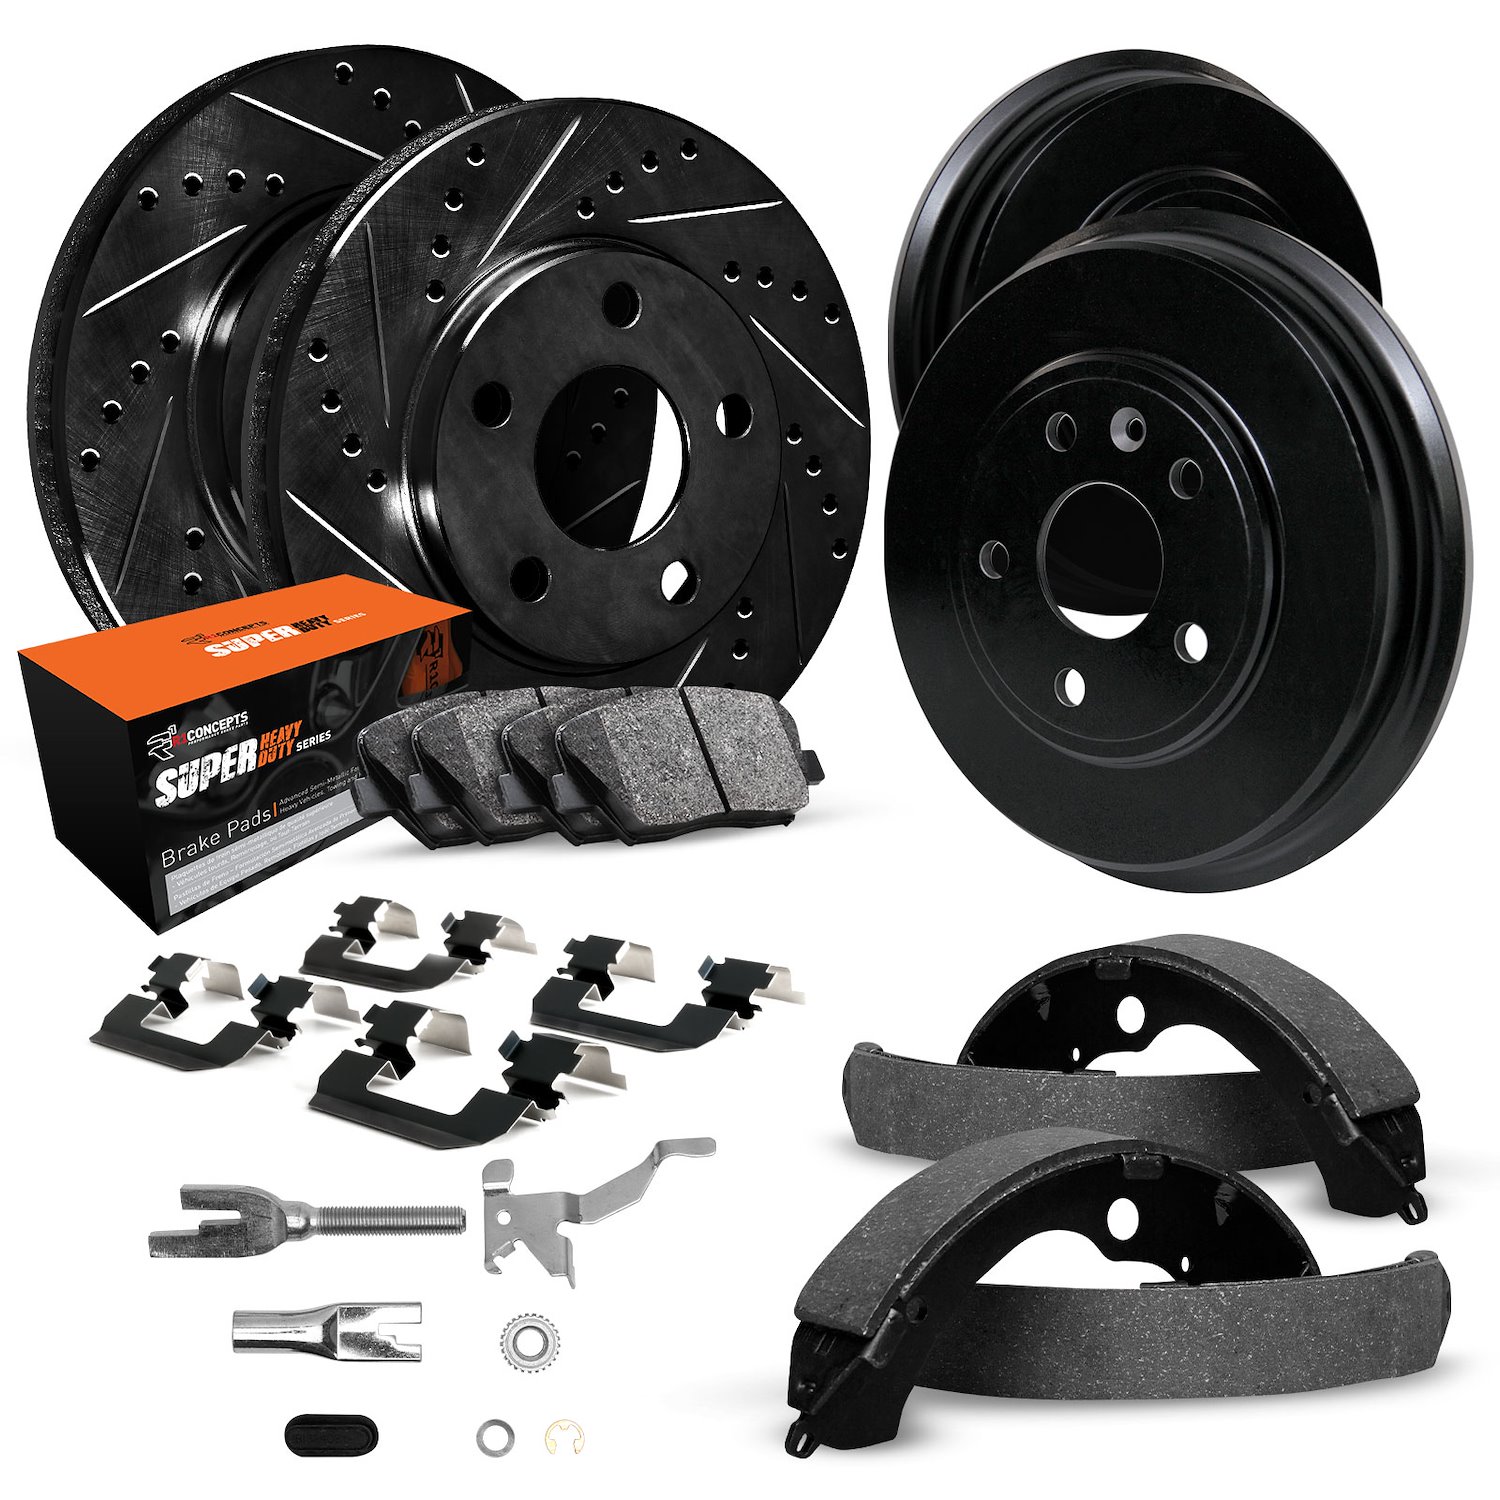 E-Line Drilled/Slotted Black Rotor & Drum Set w/Super-Duty Pads, Shoes, Hardware/Adjusters, 1975-1980 Ford/Lincoln/Mercury/Mazda